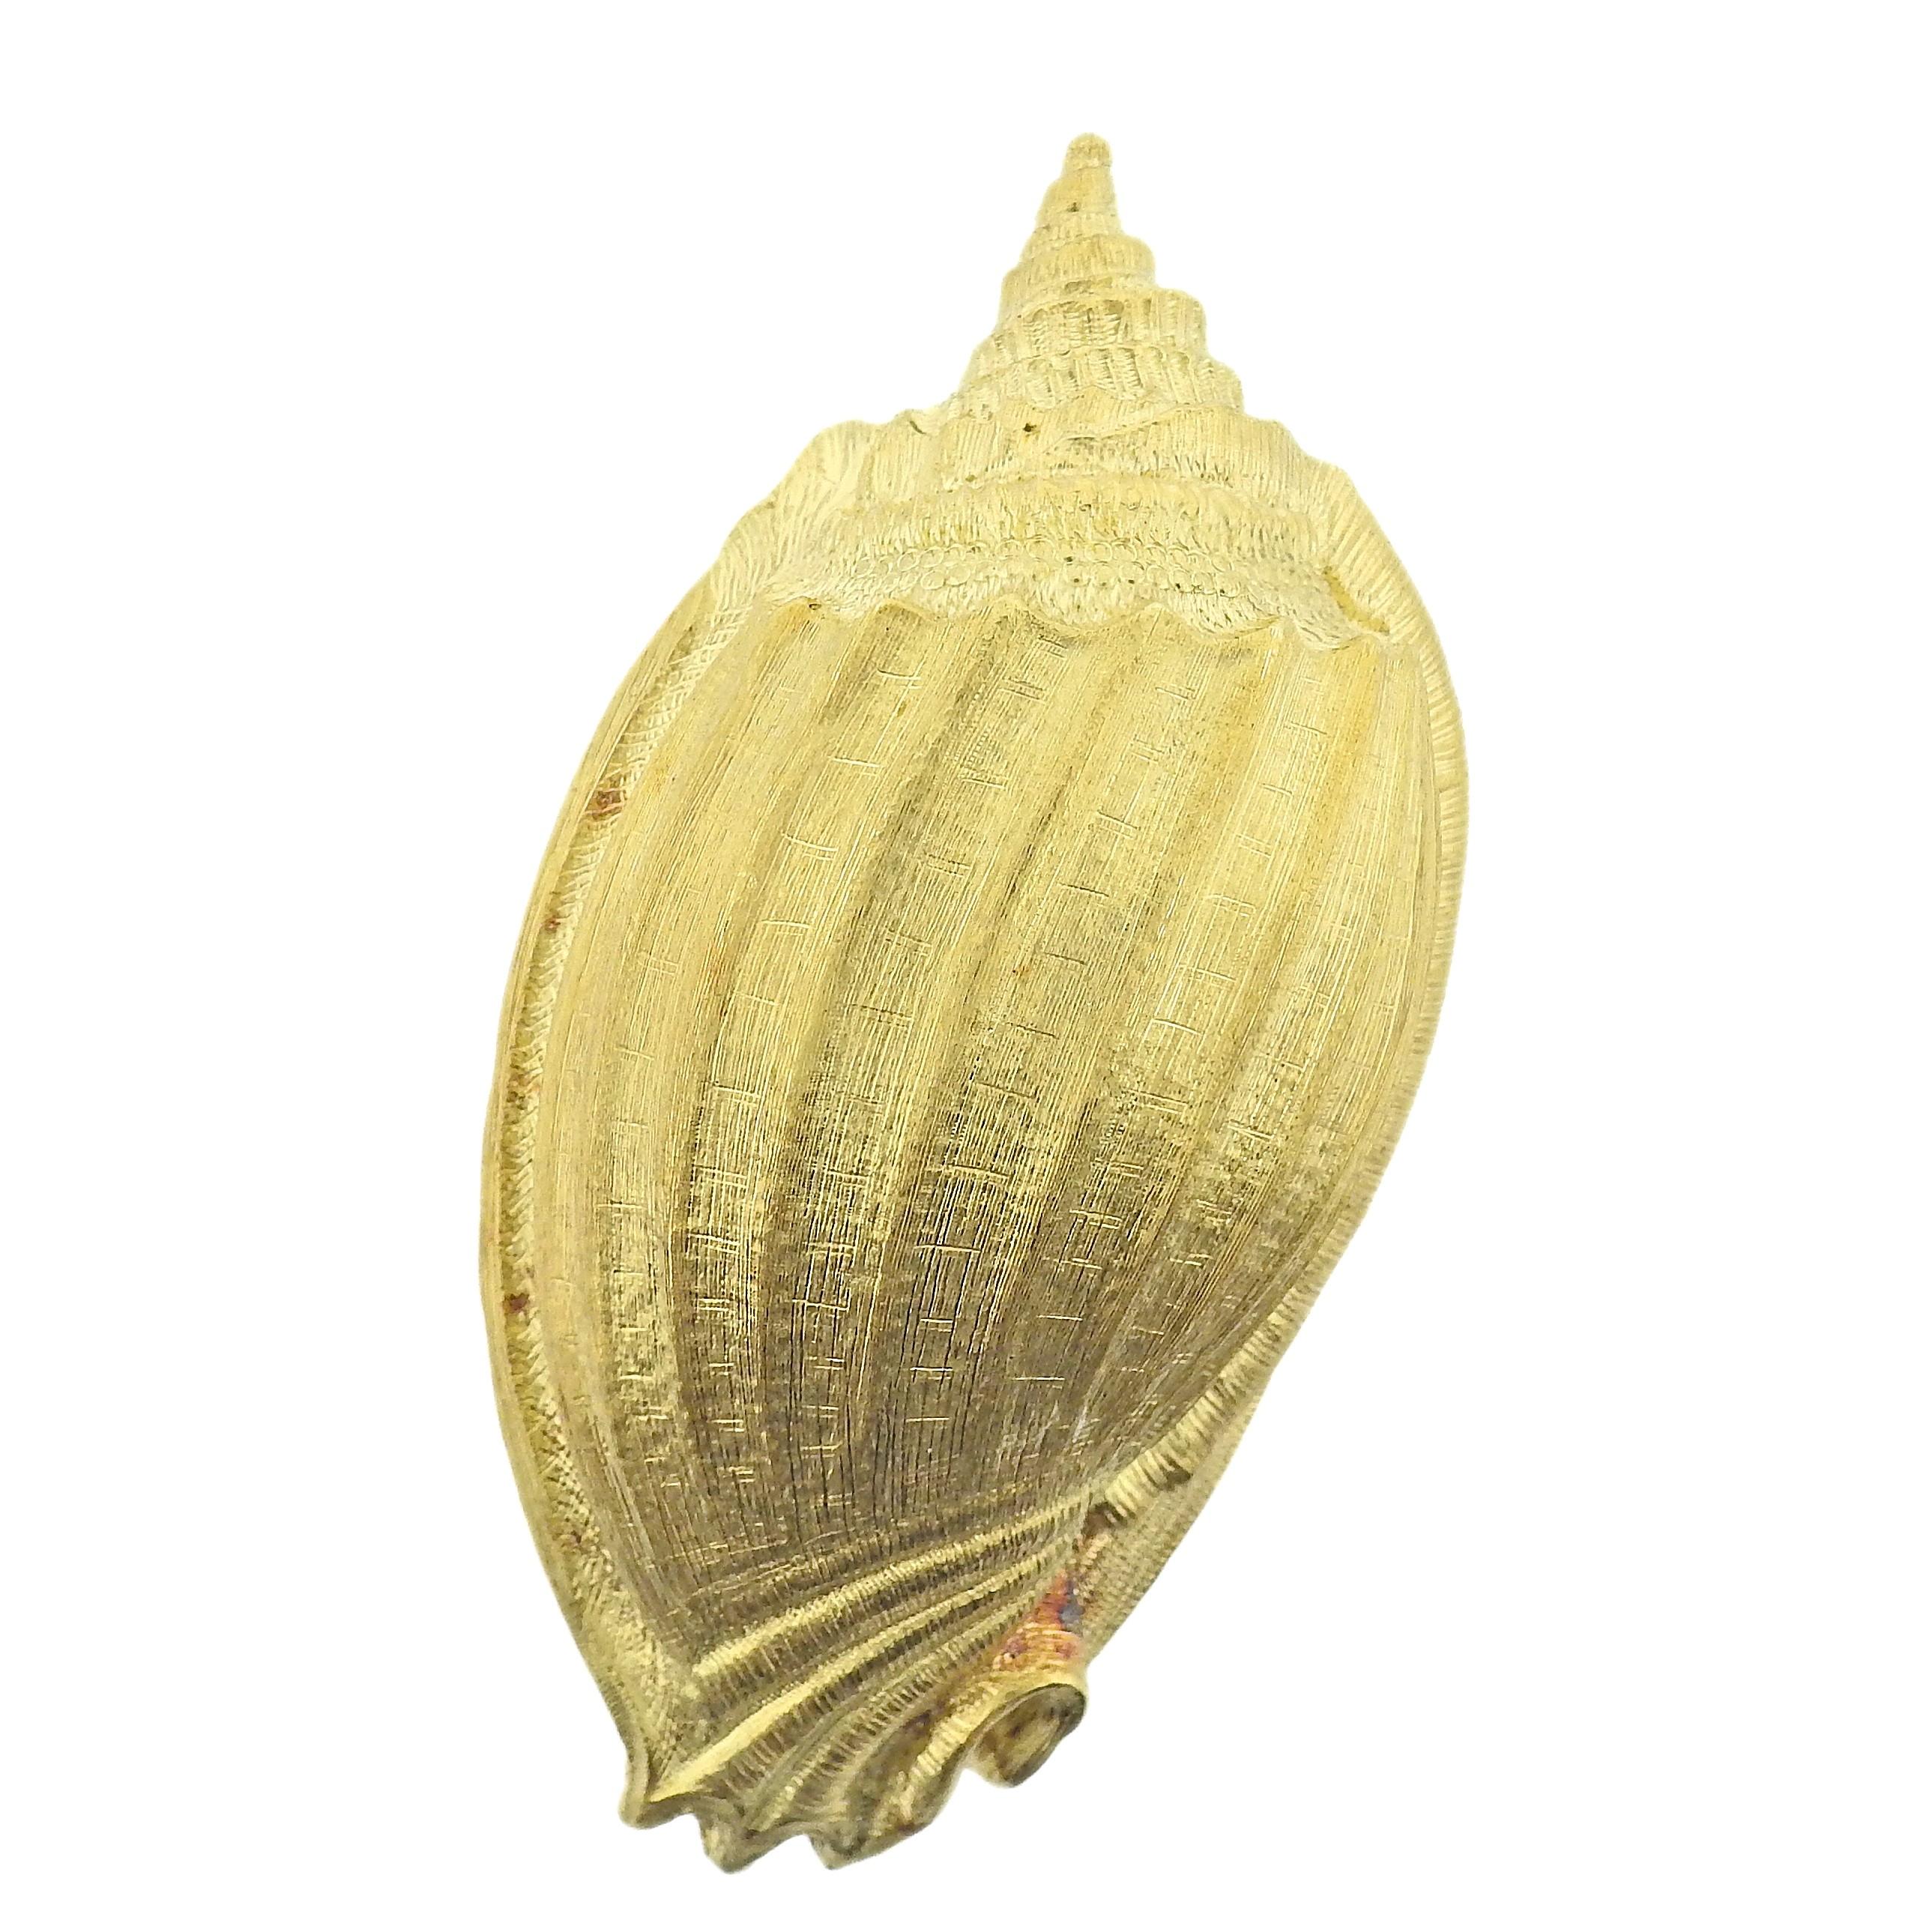 Buccellati 18k yellow gold shell brooch. Brooch measures 65mm x 34mm. Marked: Buccellati, 750. Weight is 35.7 grams.